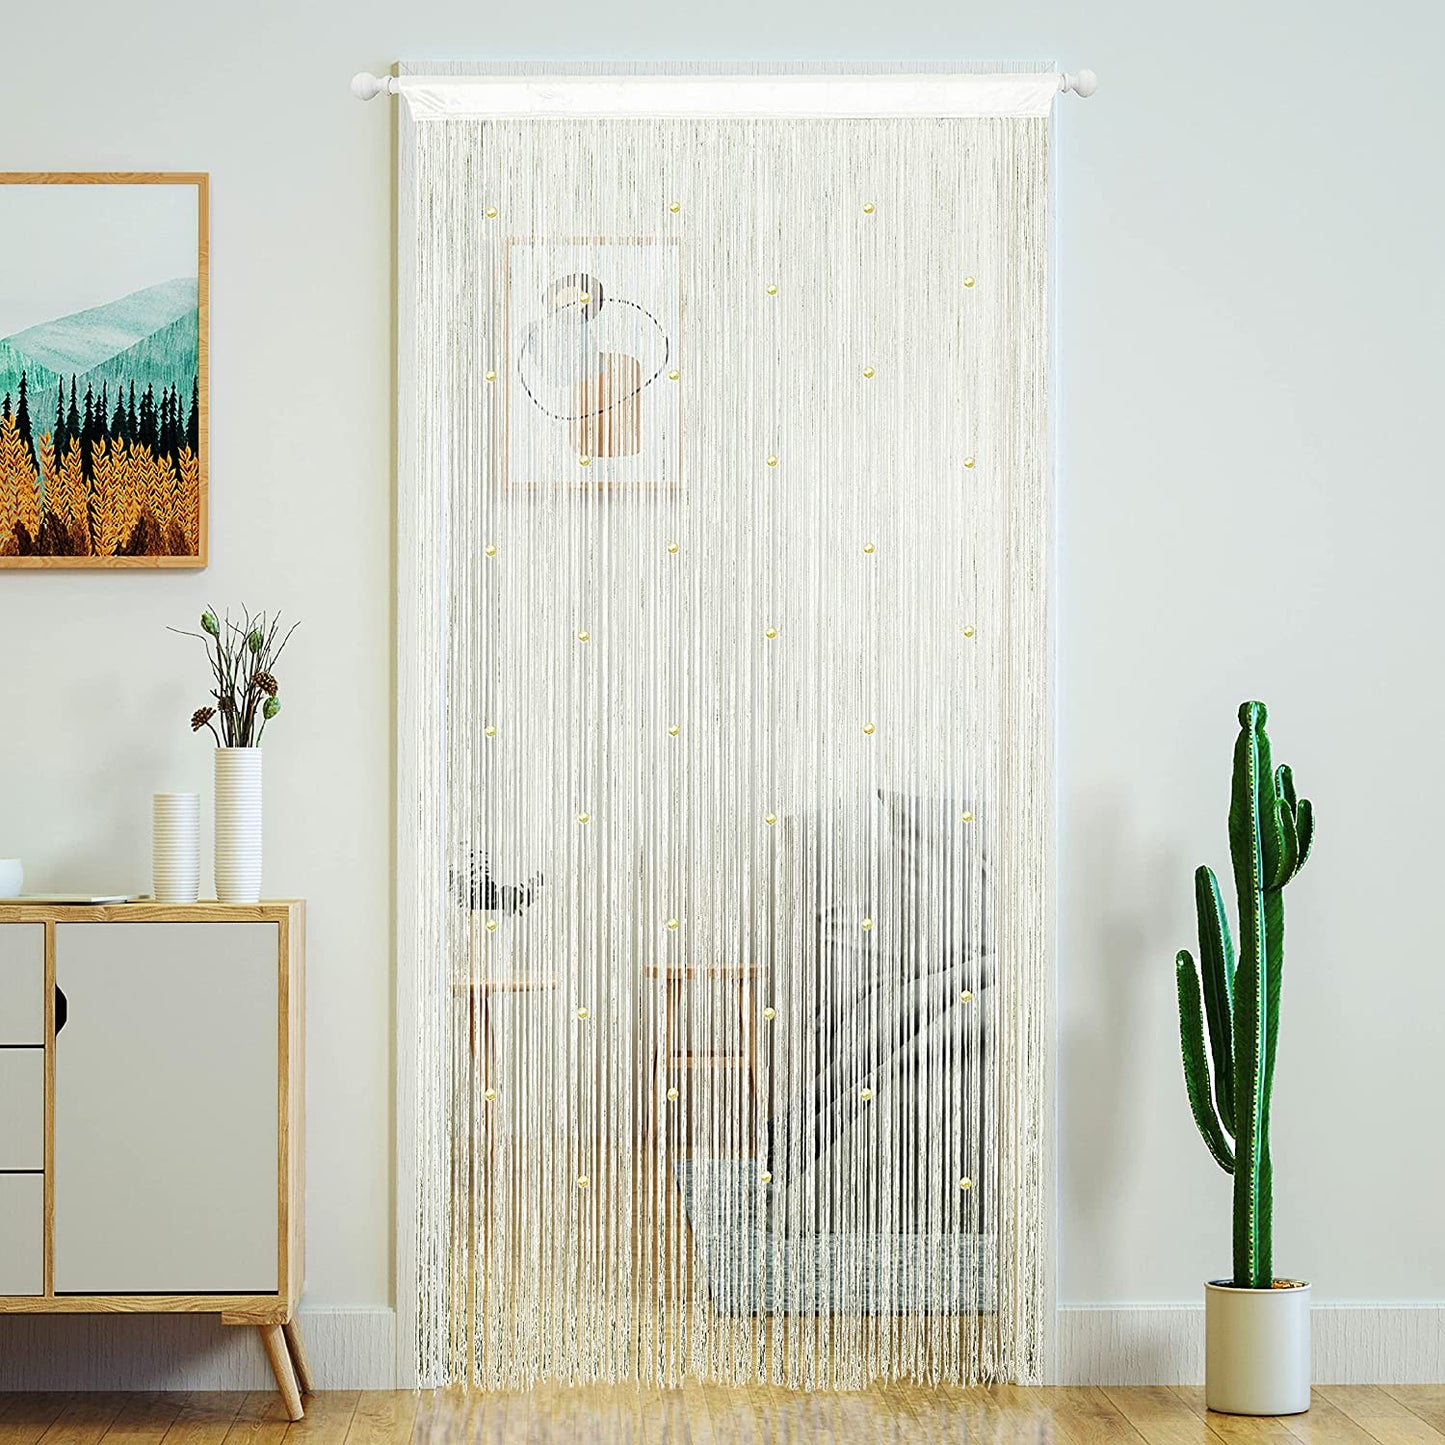 Yaoyue Beaded Curtain Door String Curtains for Doorway Tassels Beads Hanging Fringe Hippie Room Divider Window Hallway Entrance Wall Closet Bedroom Privacy Decor (39×79In/100×200Cm, Light Coffee)  YaoYue Beige 100×200Cm 